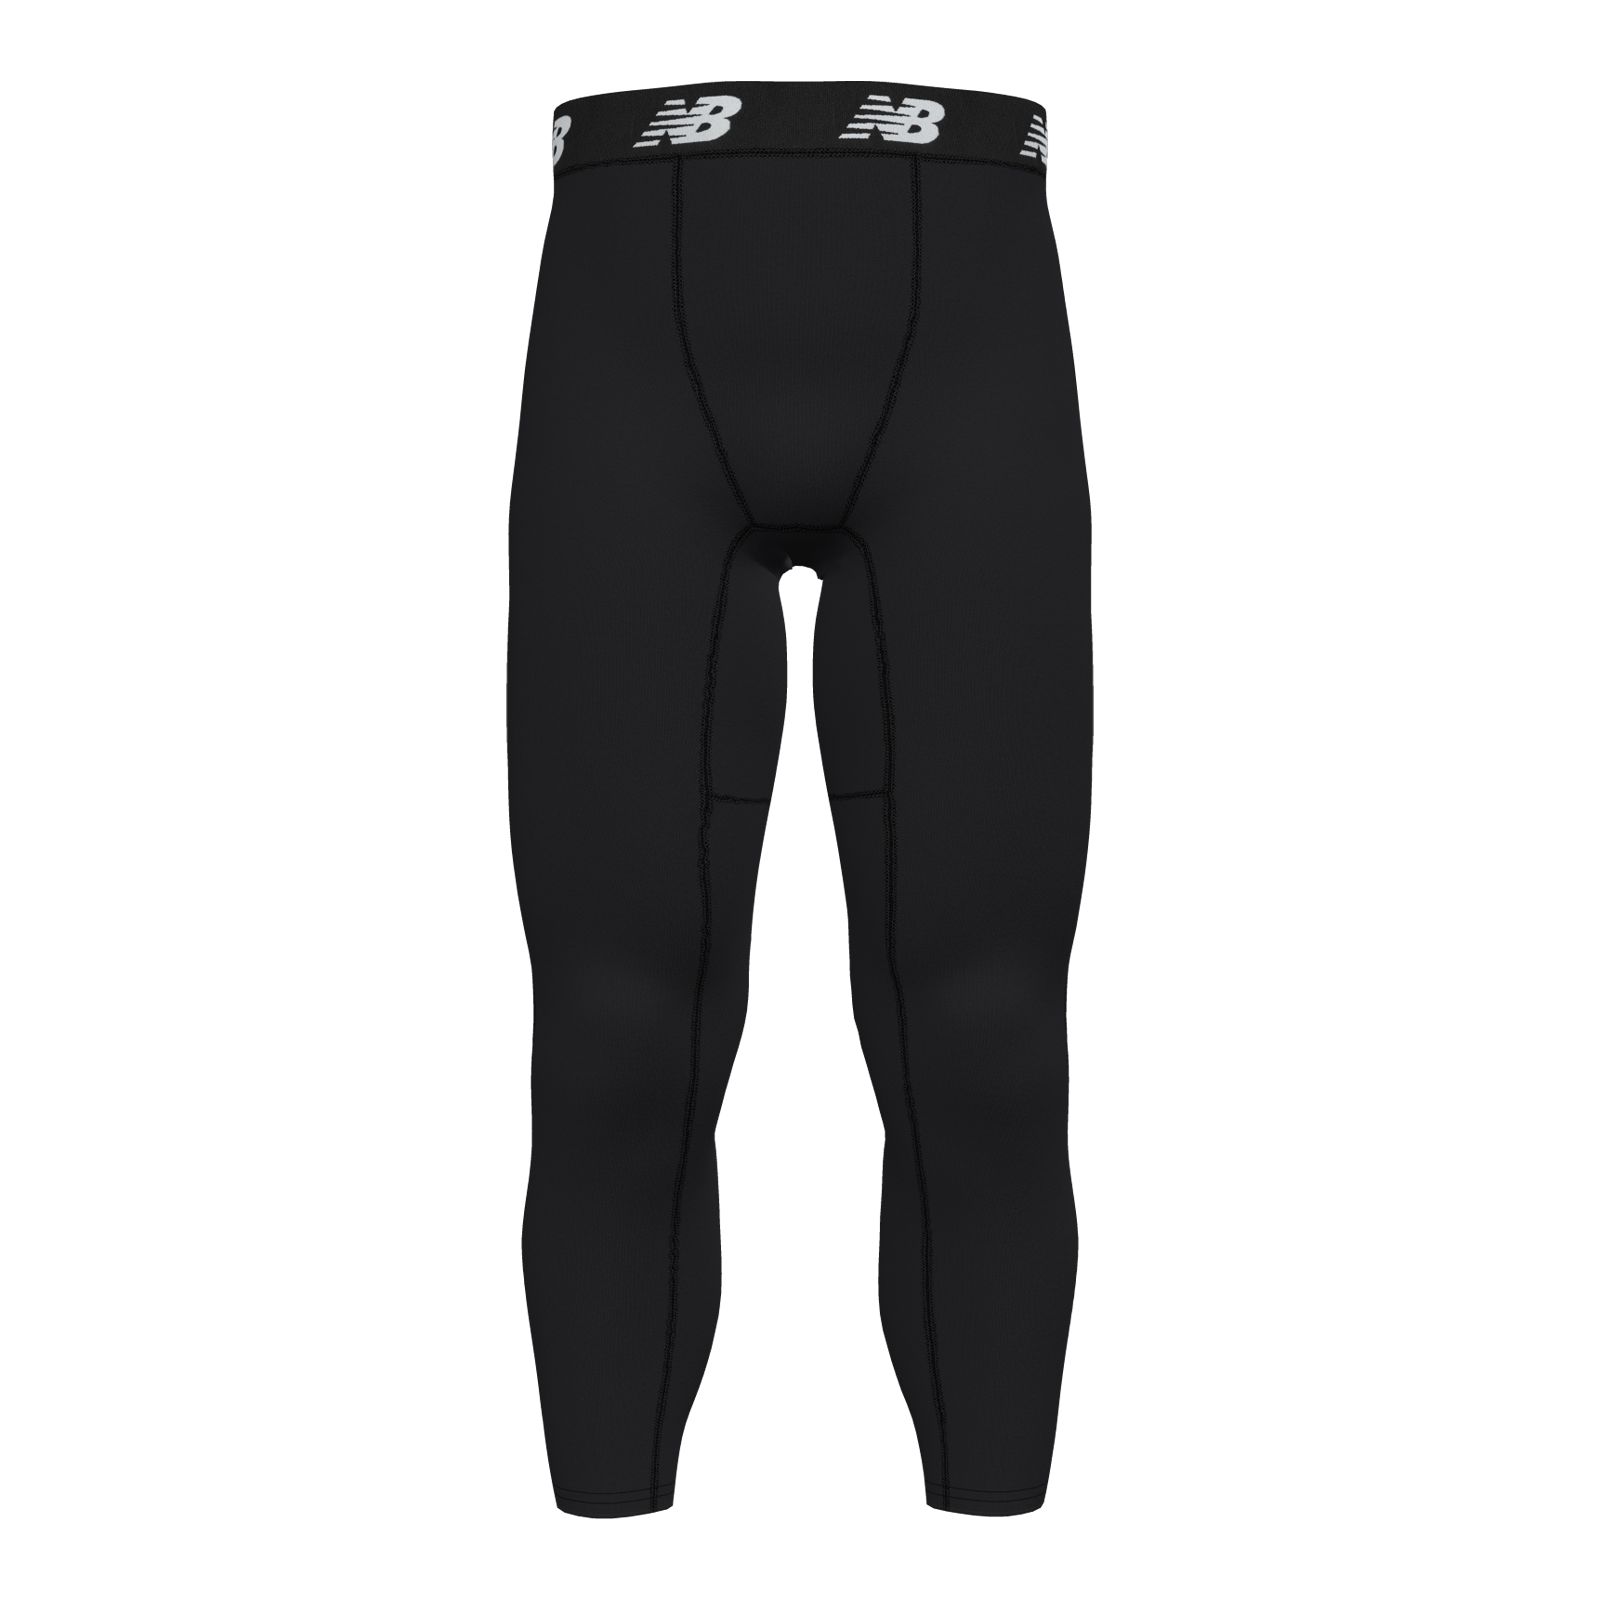  Youth Boys Leggings One Leg Compression Pants 3/4 Basketball  Sports Tights Running Capris Kids Athletic Base Layer White XS